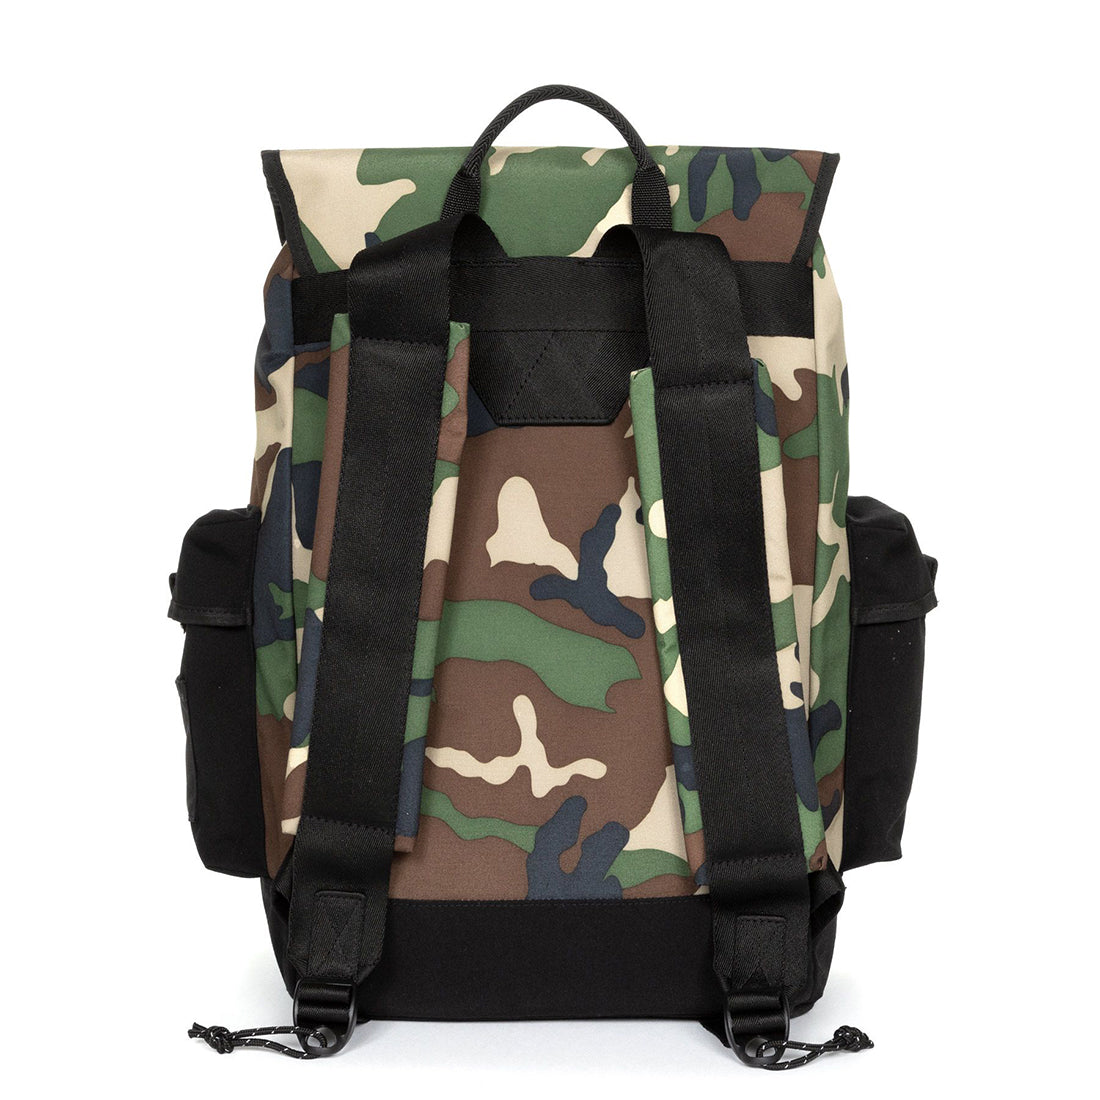 Zaino Unisex Eastpak - Obsten Roothed -Camo